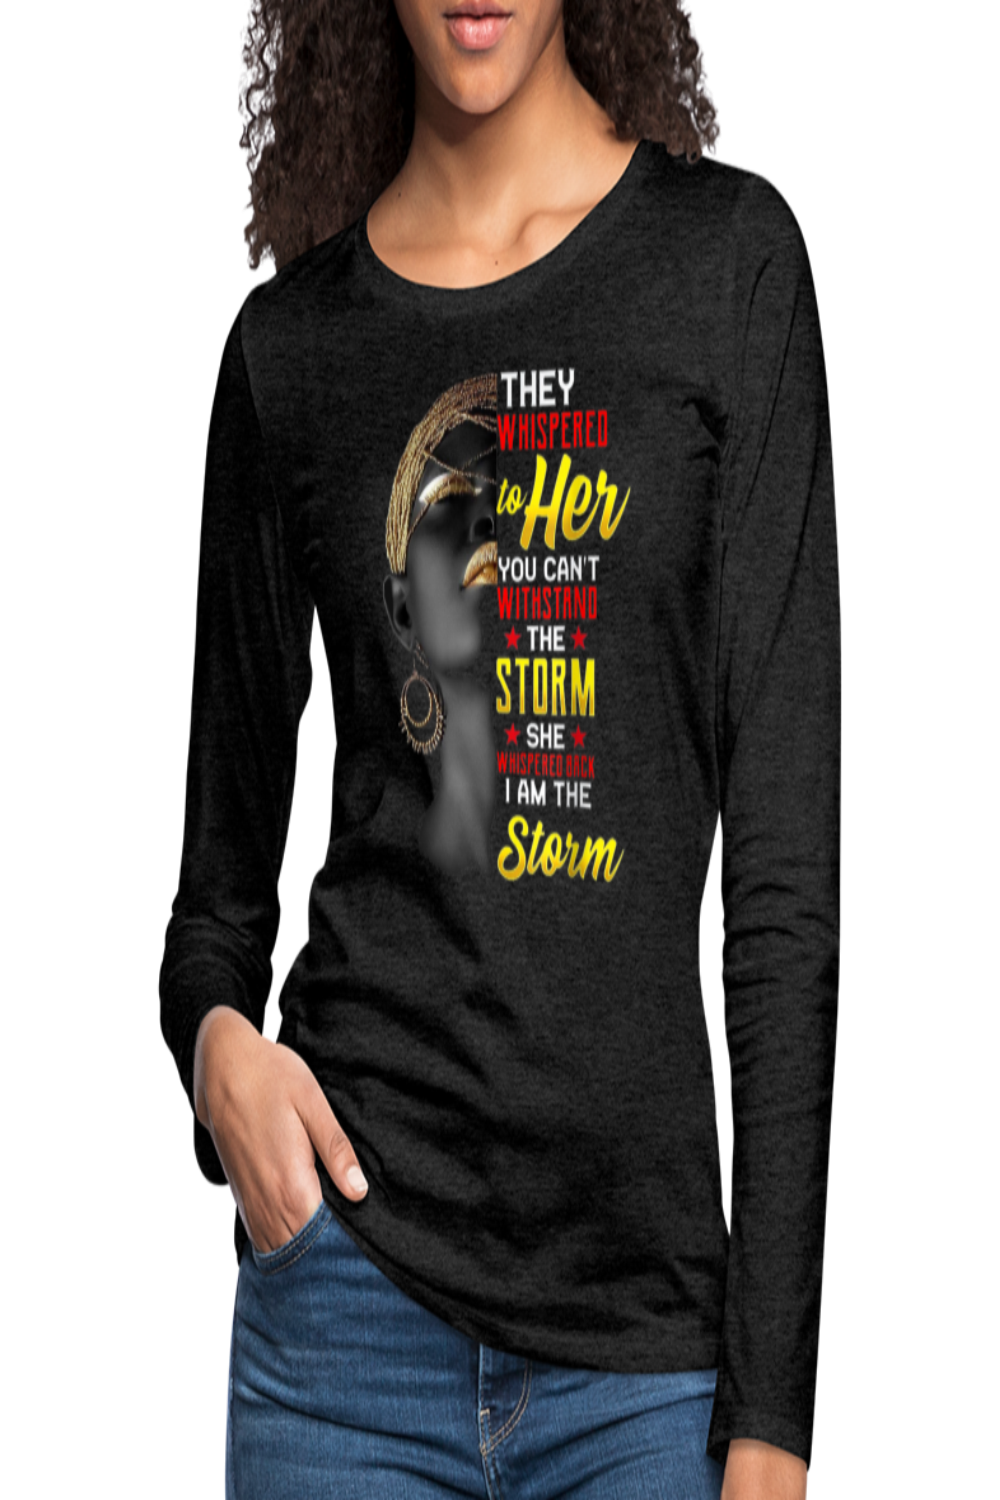 Women's They Whispered Long Sleeve T-Shirt - NicholesGifts.online